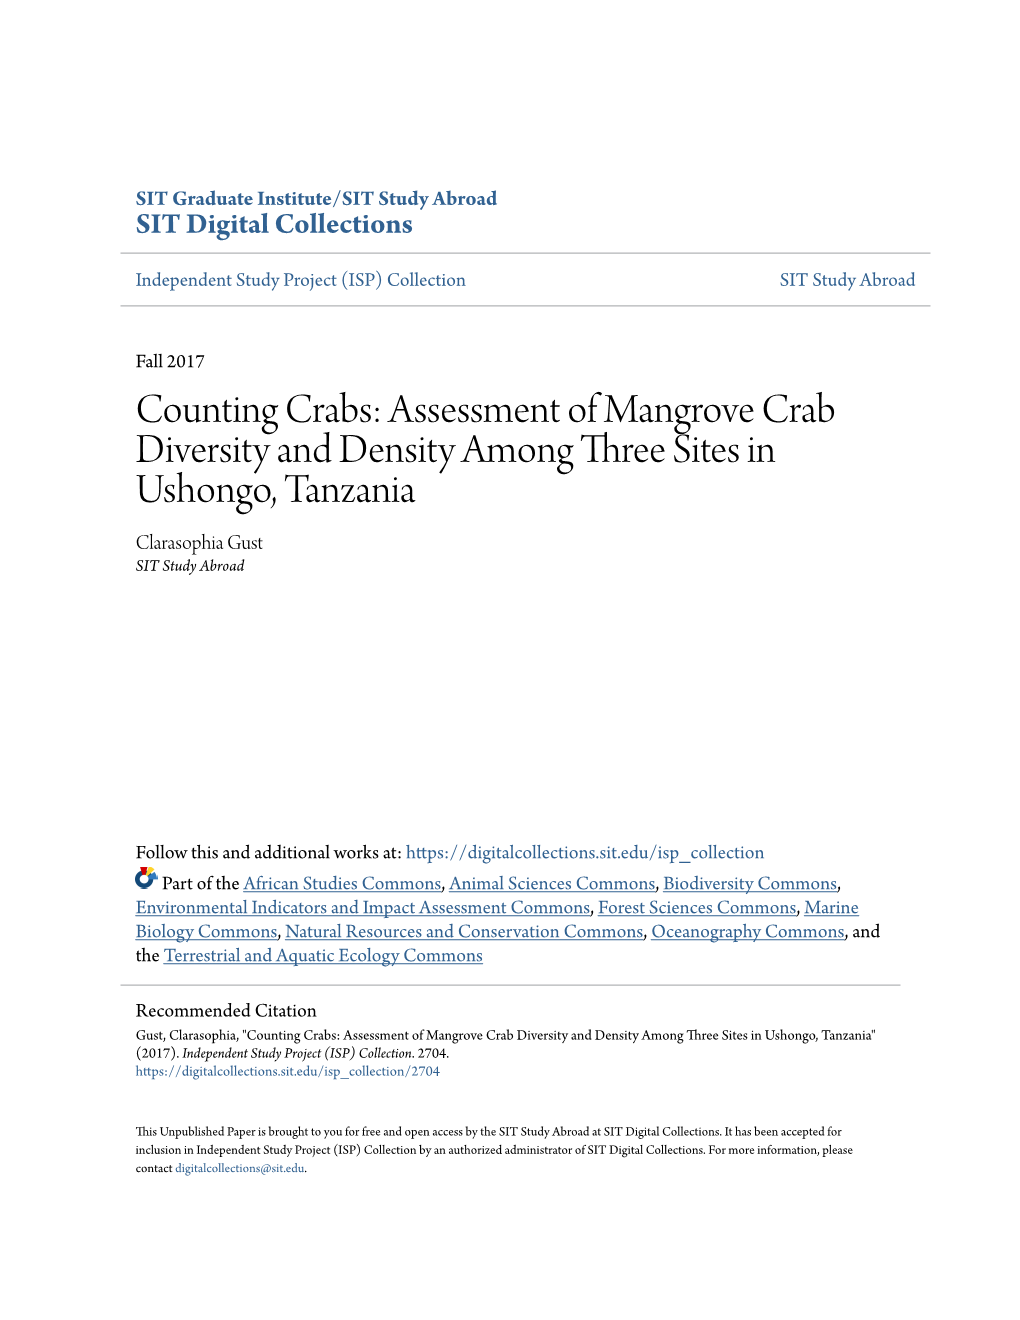 Counting Crabs: Assessment of Mangrove Crab Diversity and Density Among Three Sites in Ushongo, Tanzania Clarasophia Gust SIT Study Abroad